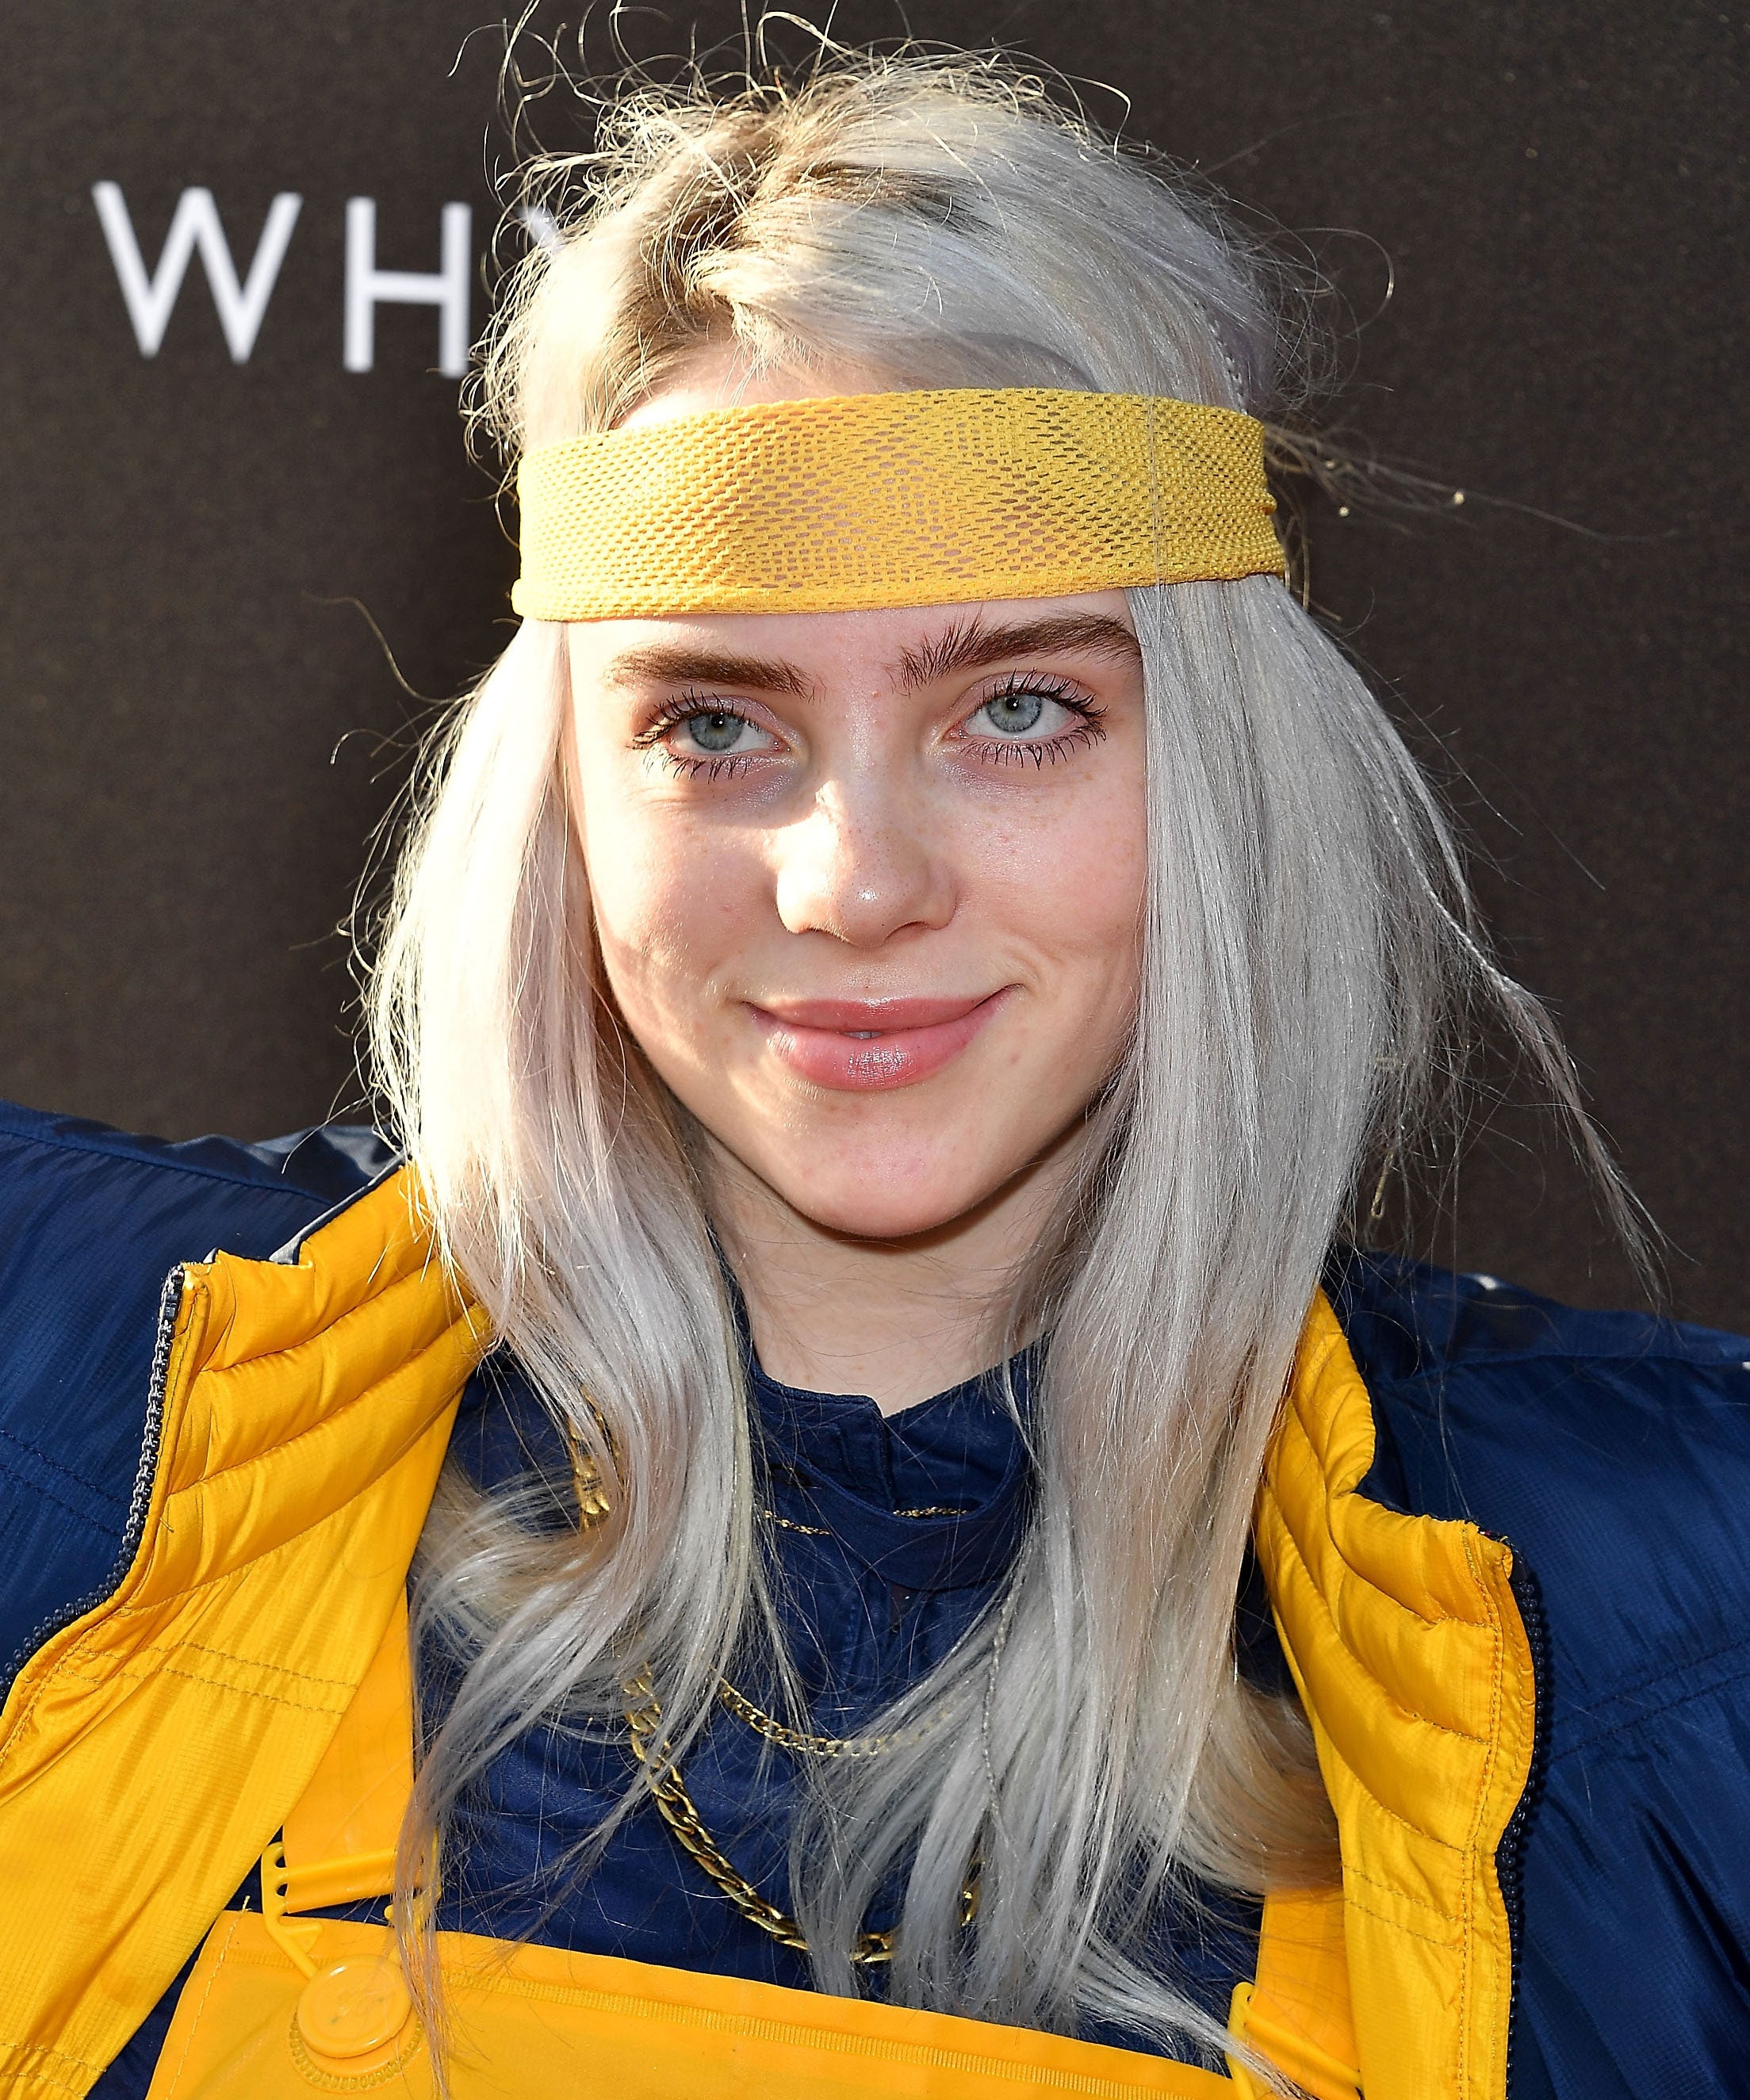 Billie Eilish Brought Back Green Hair Roots For Grammys